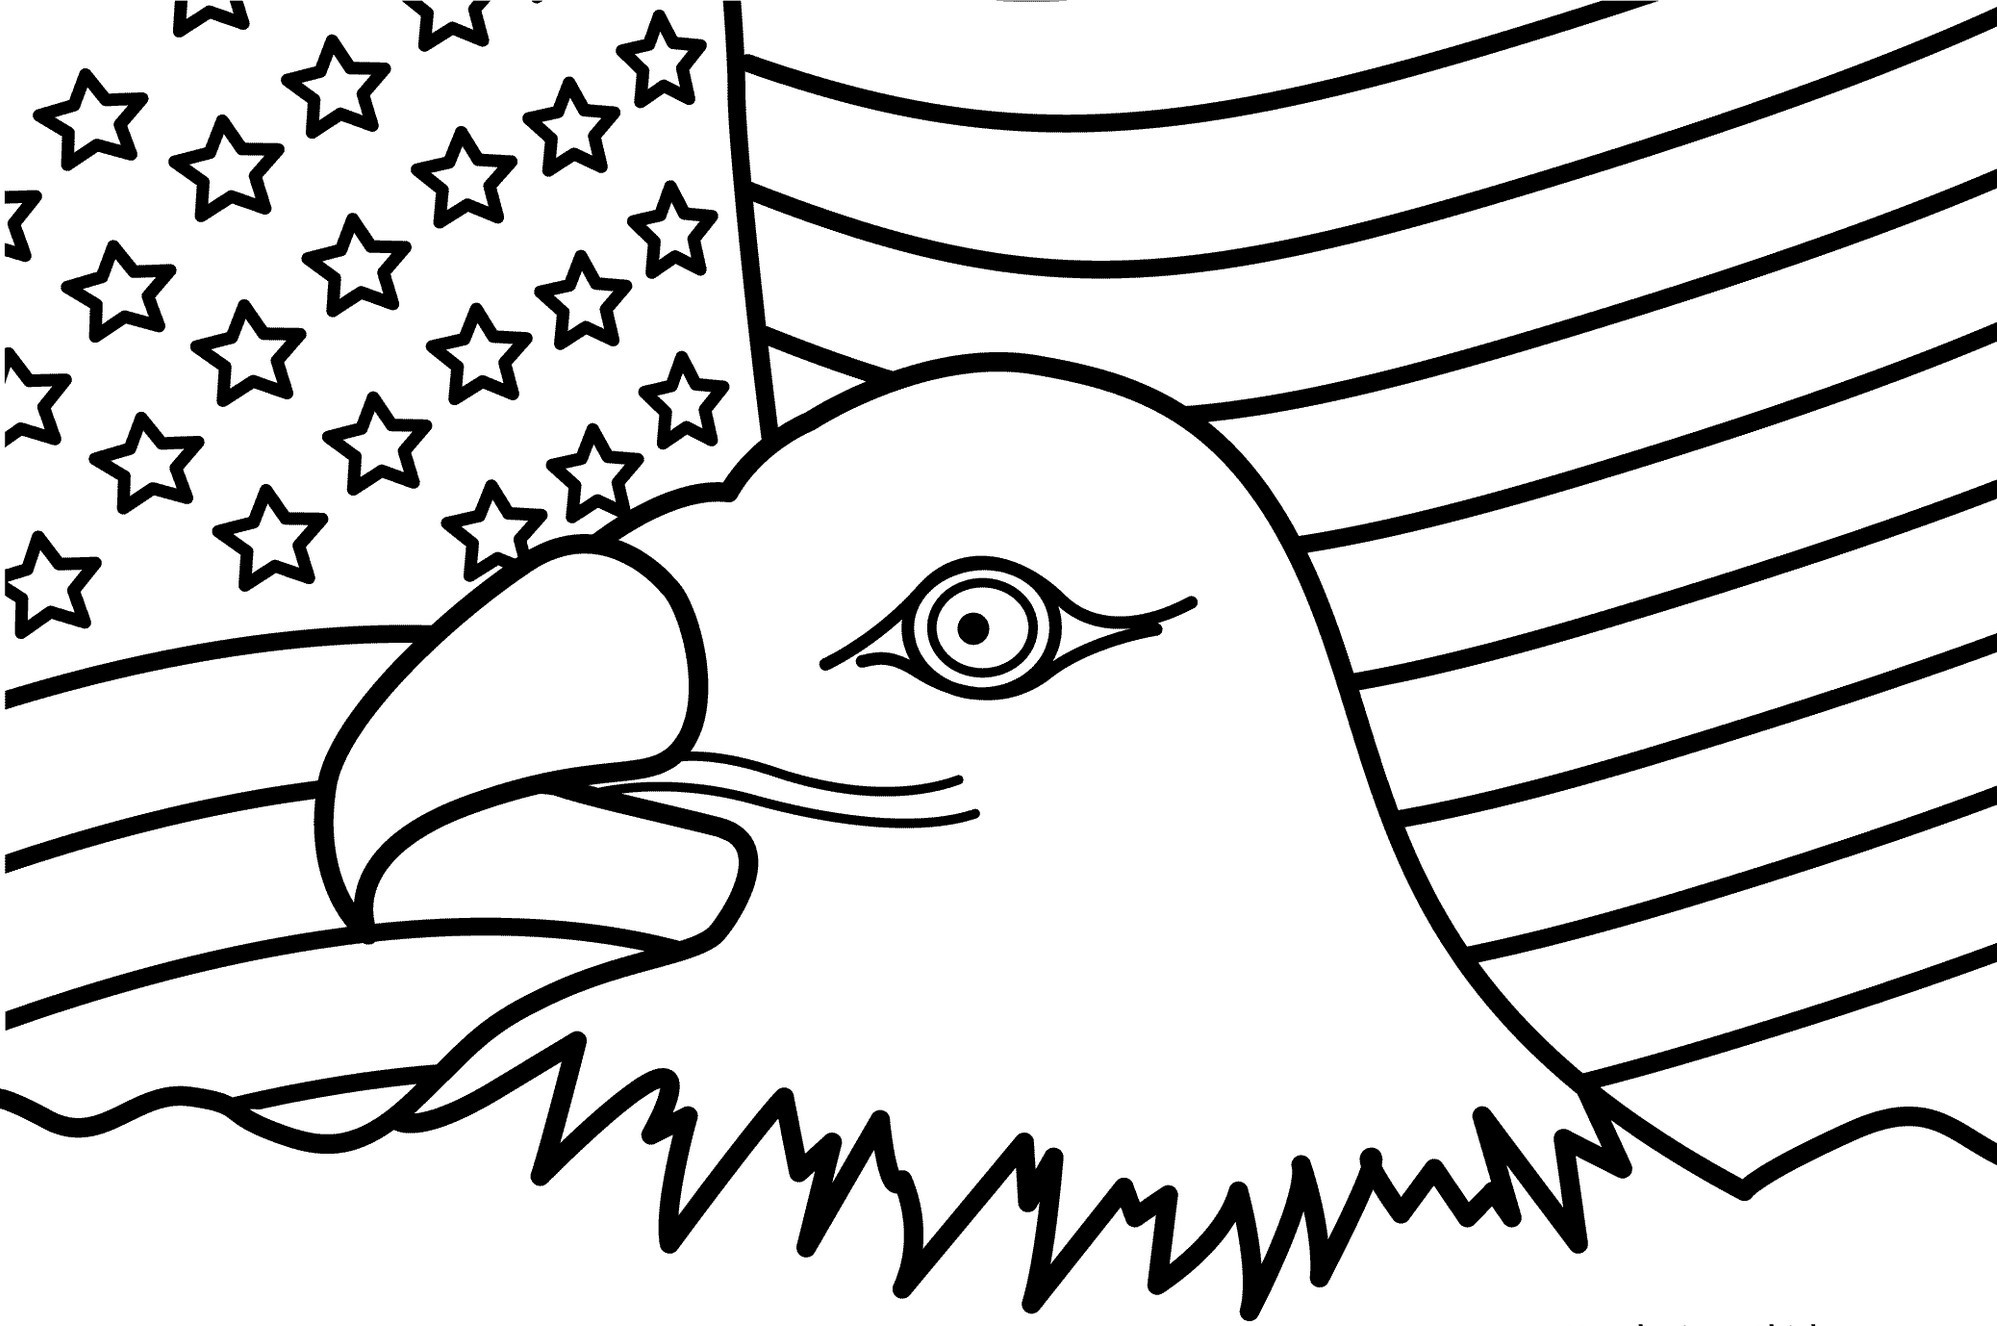 U.S.Flag Coloring Pages
 united states of america flag coloring page